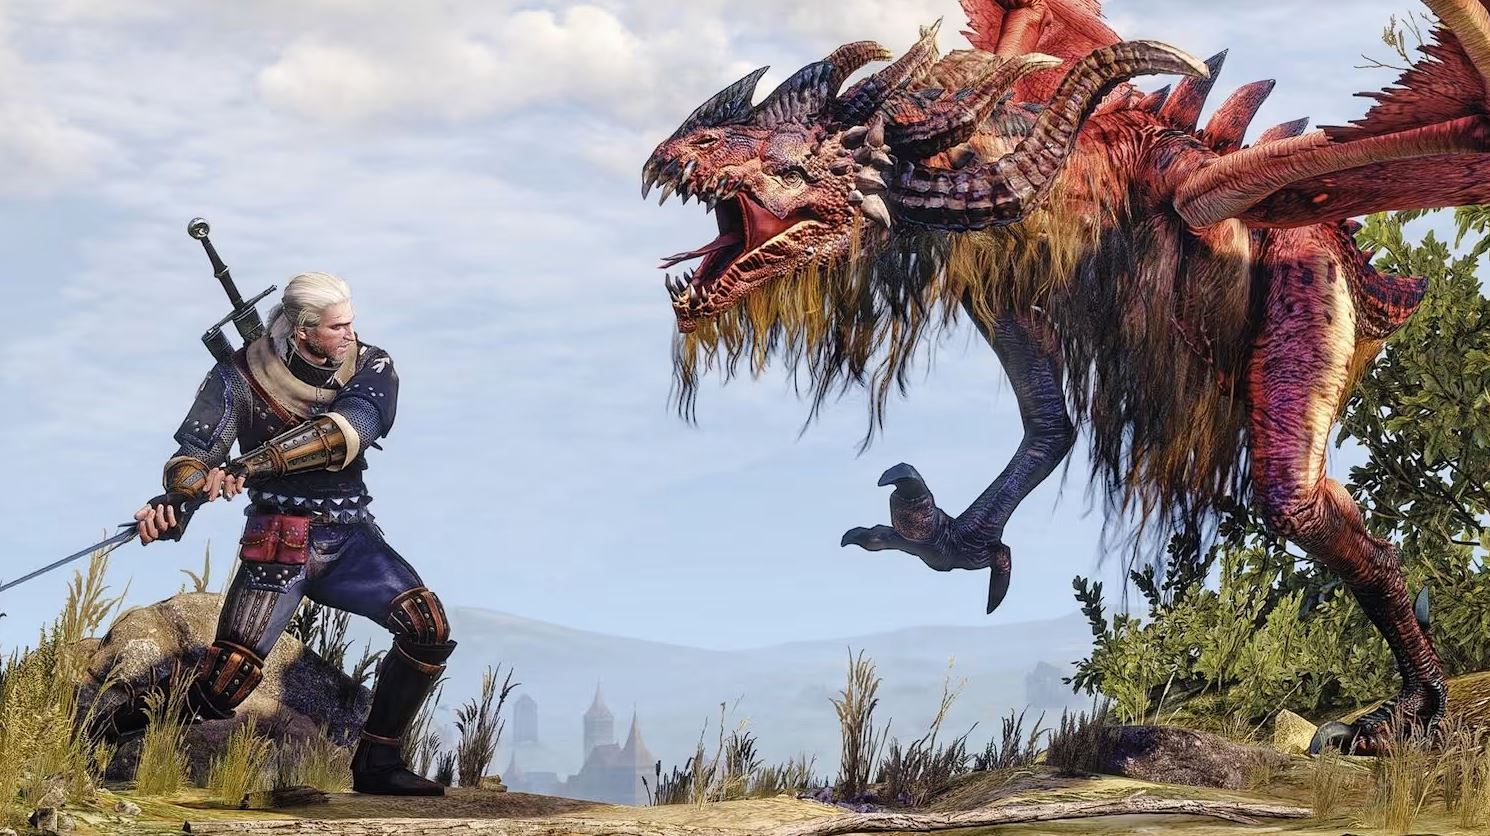 Combat should take center stage in The Witcher 4.